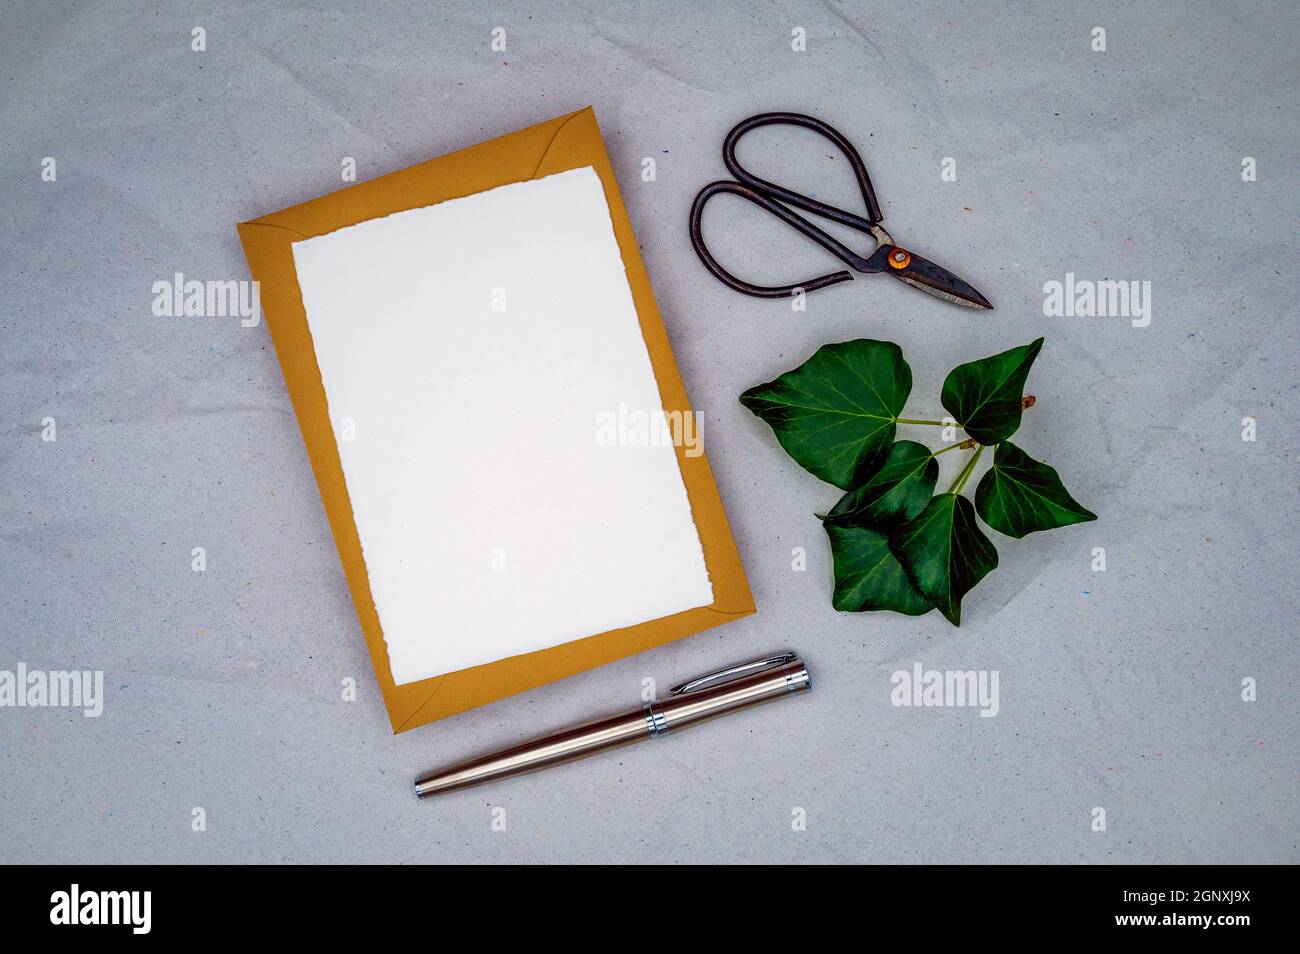 Blank greeting, condolence or invitation mockup with brown envelope, handmade white paper, and ivy. Flat lay, top view, copy space. Stock Photo